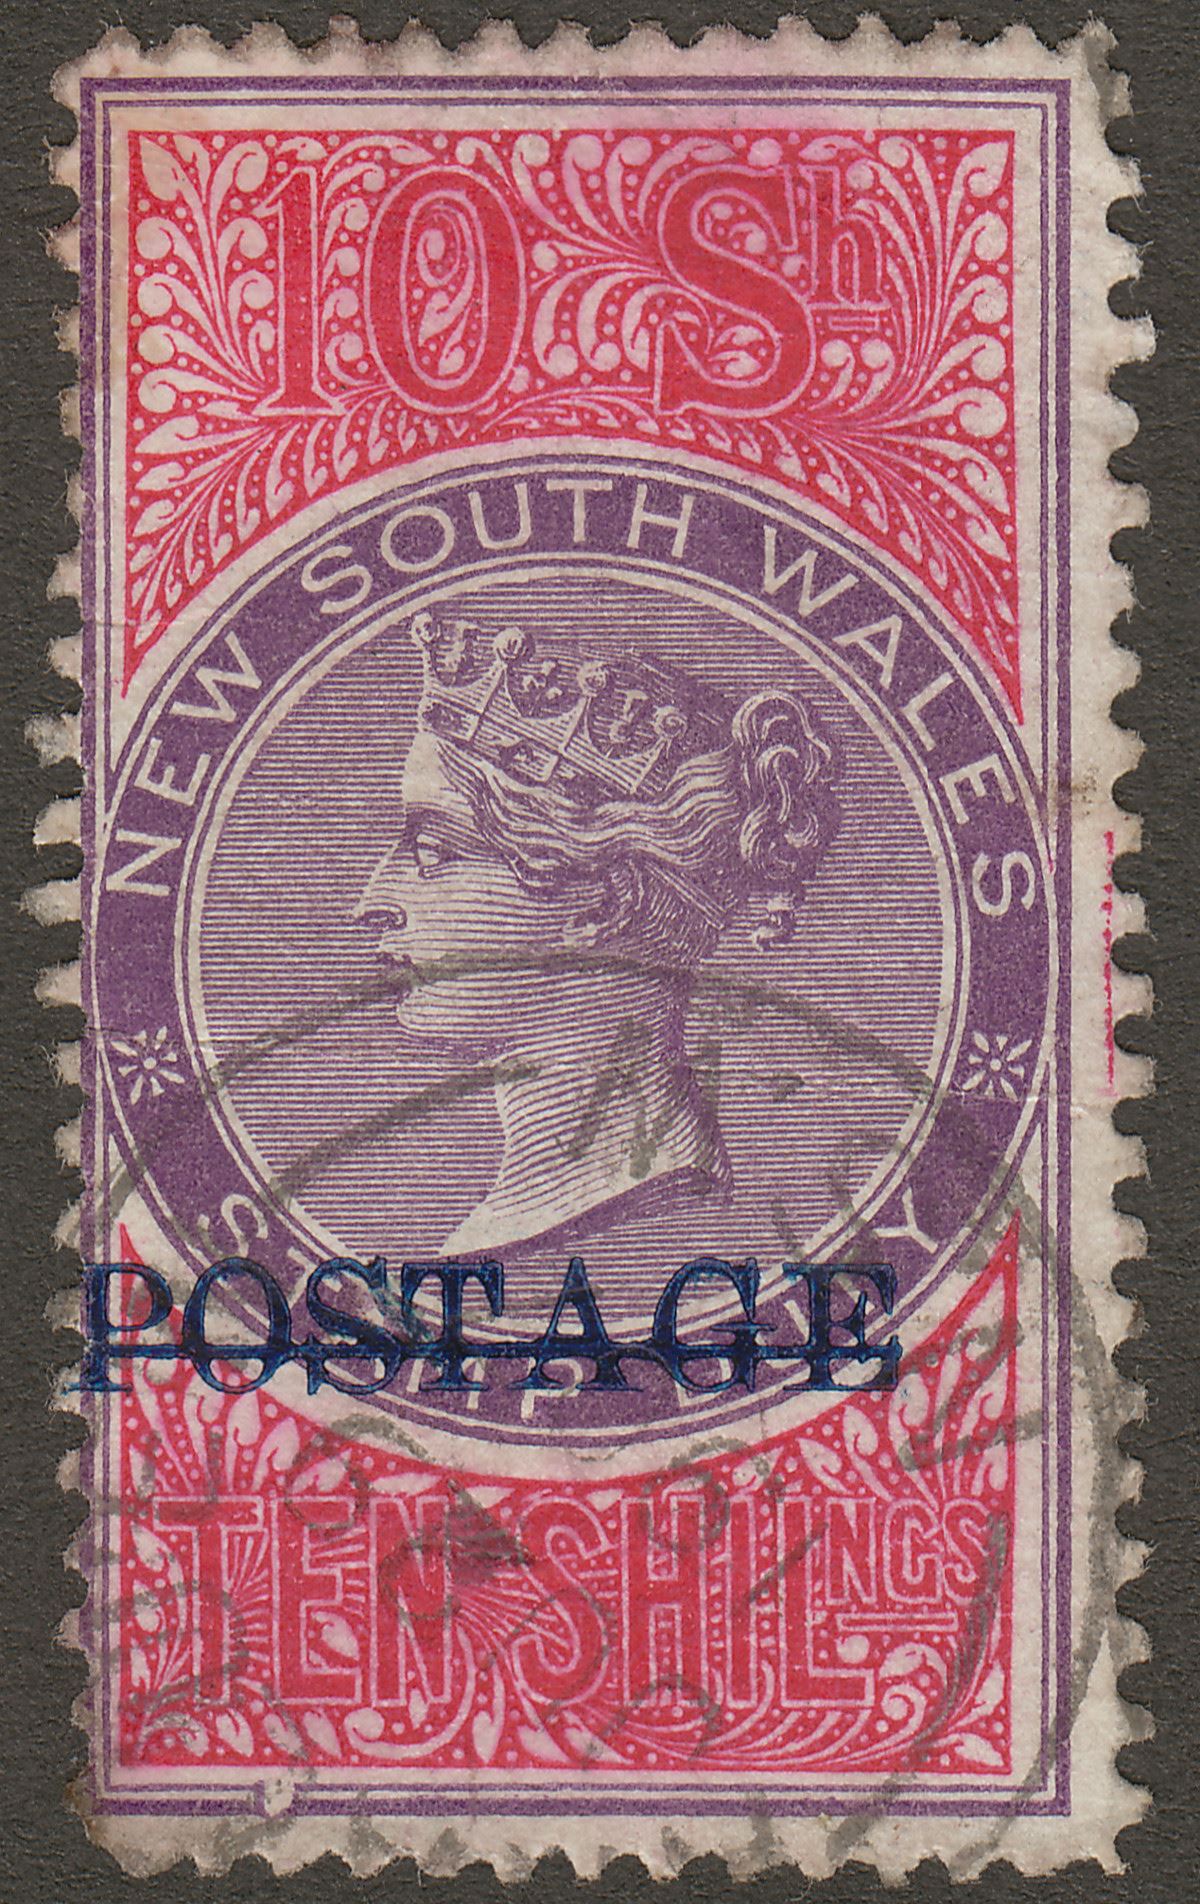 New South Wales 1904 QV Postage Opt 10sh Violet and Rosine p12x11 Used SG277b